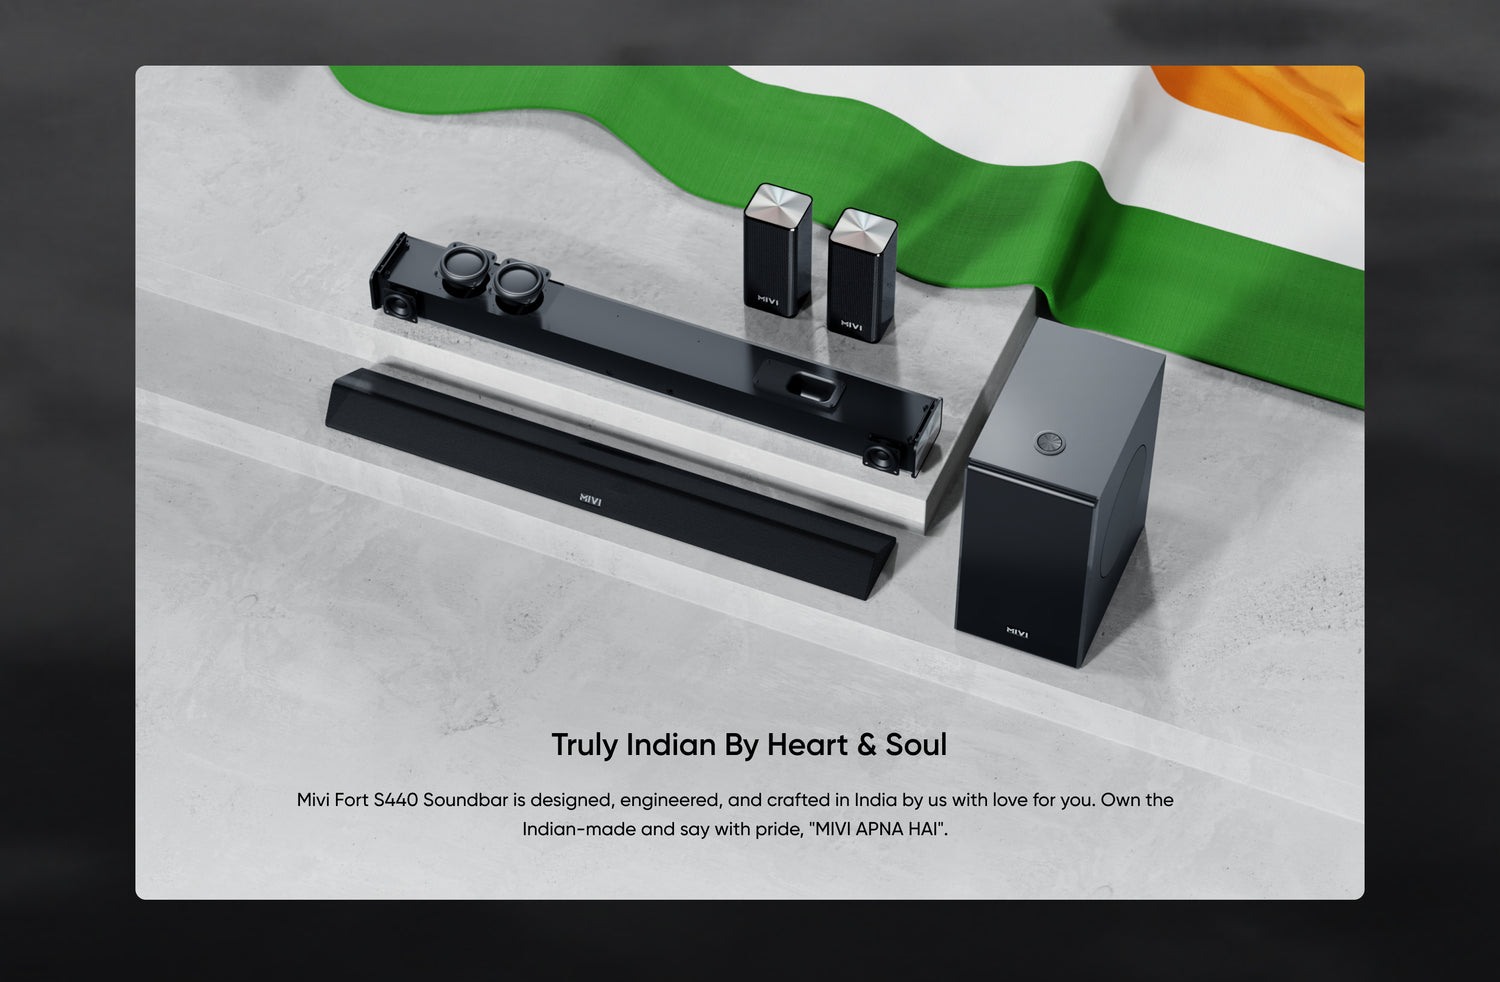 Truly Indian by Heart & Soul - Mivi Fort S440 Soundbar is designed, engineered, and crafted in India by us with love for you. Own the Indian-made and say with pride, "MIVI APNA HAI".